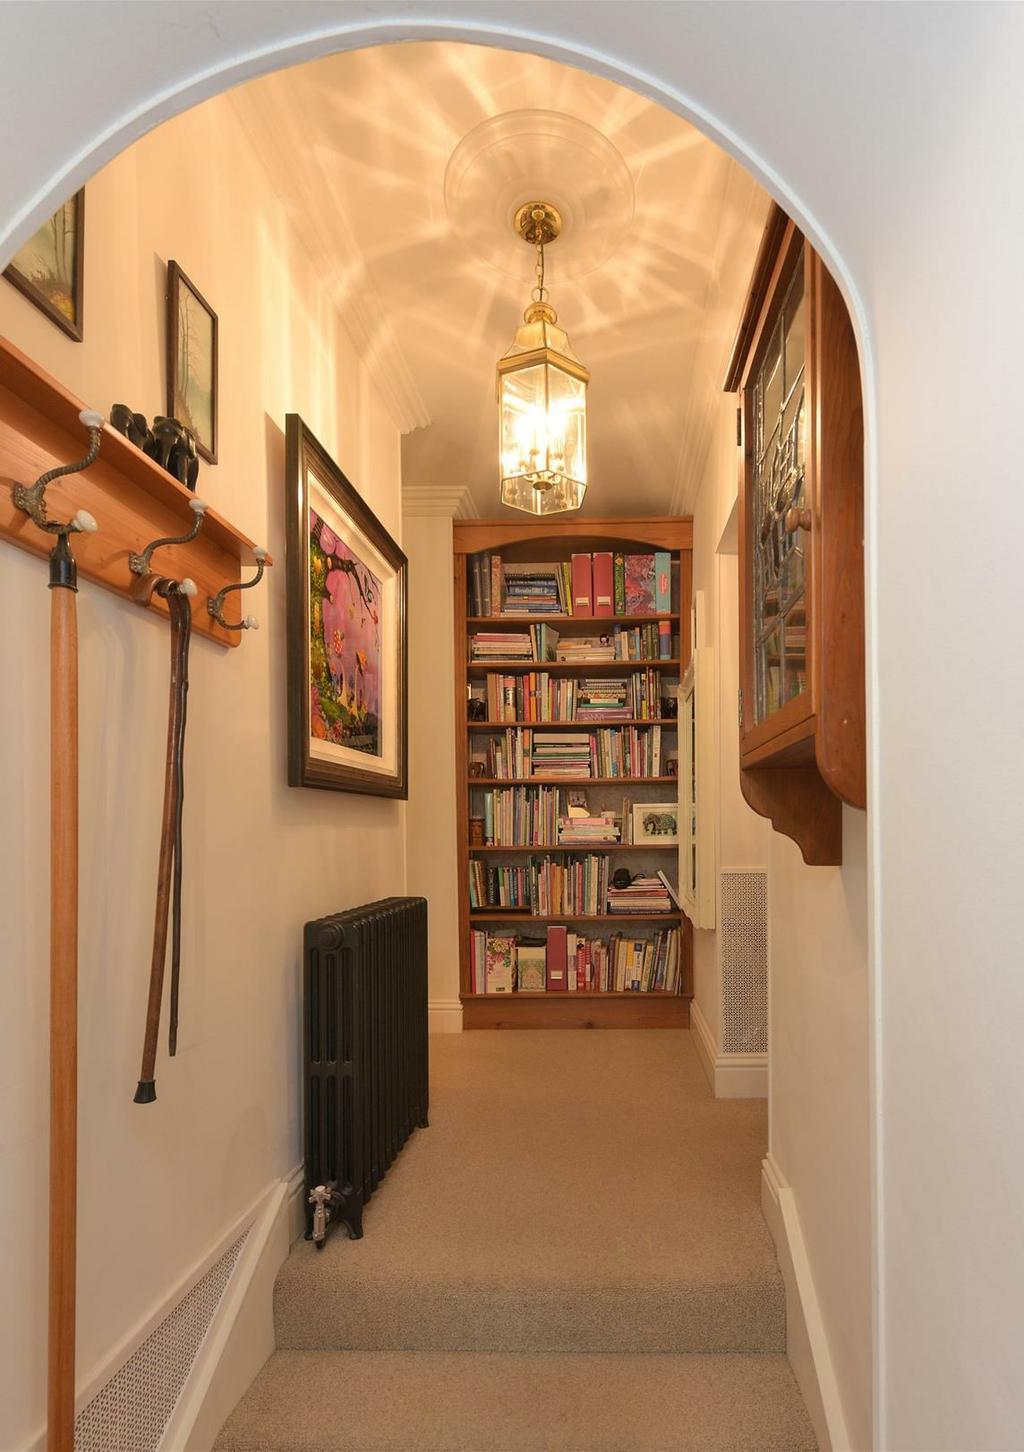 The property is beautifully presented throughout to include a host of original